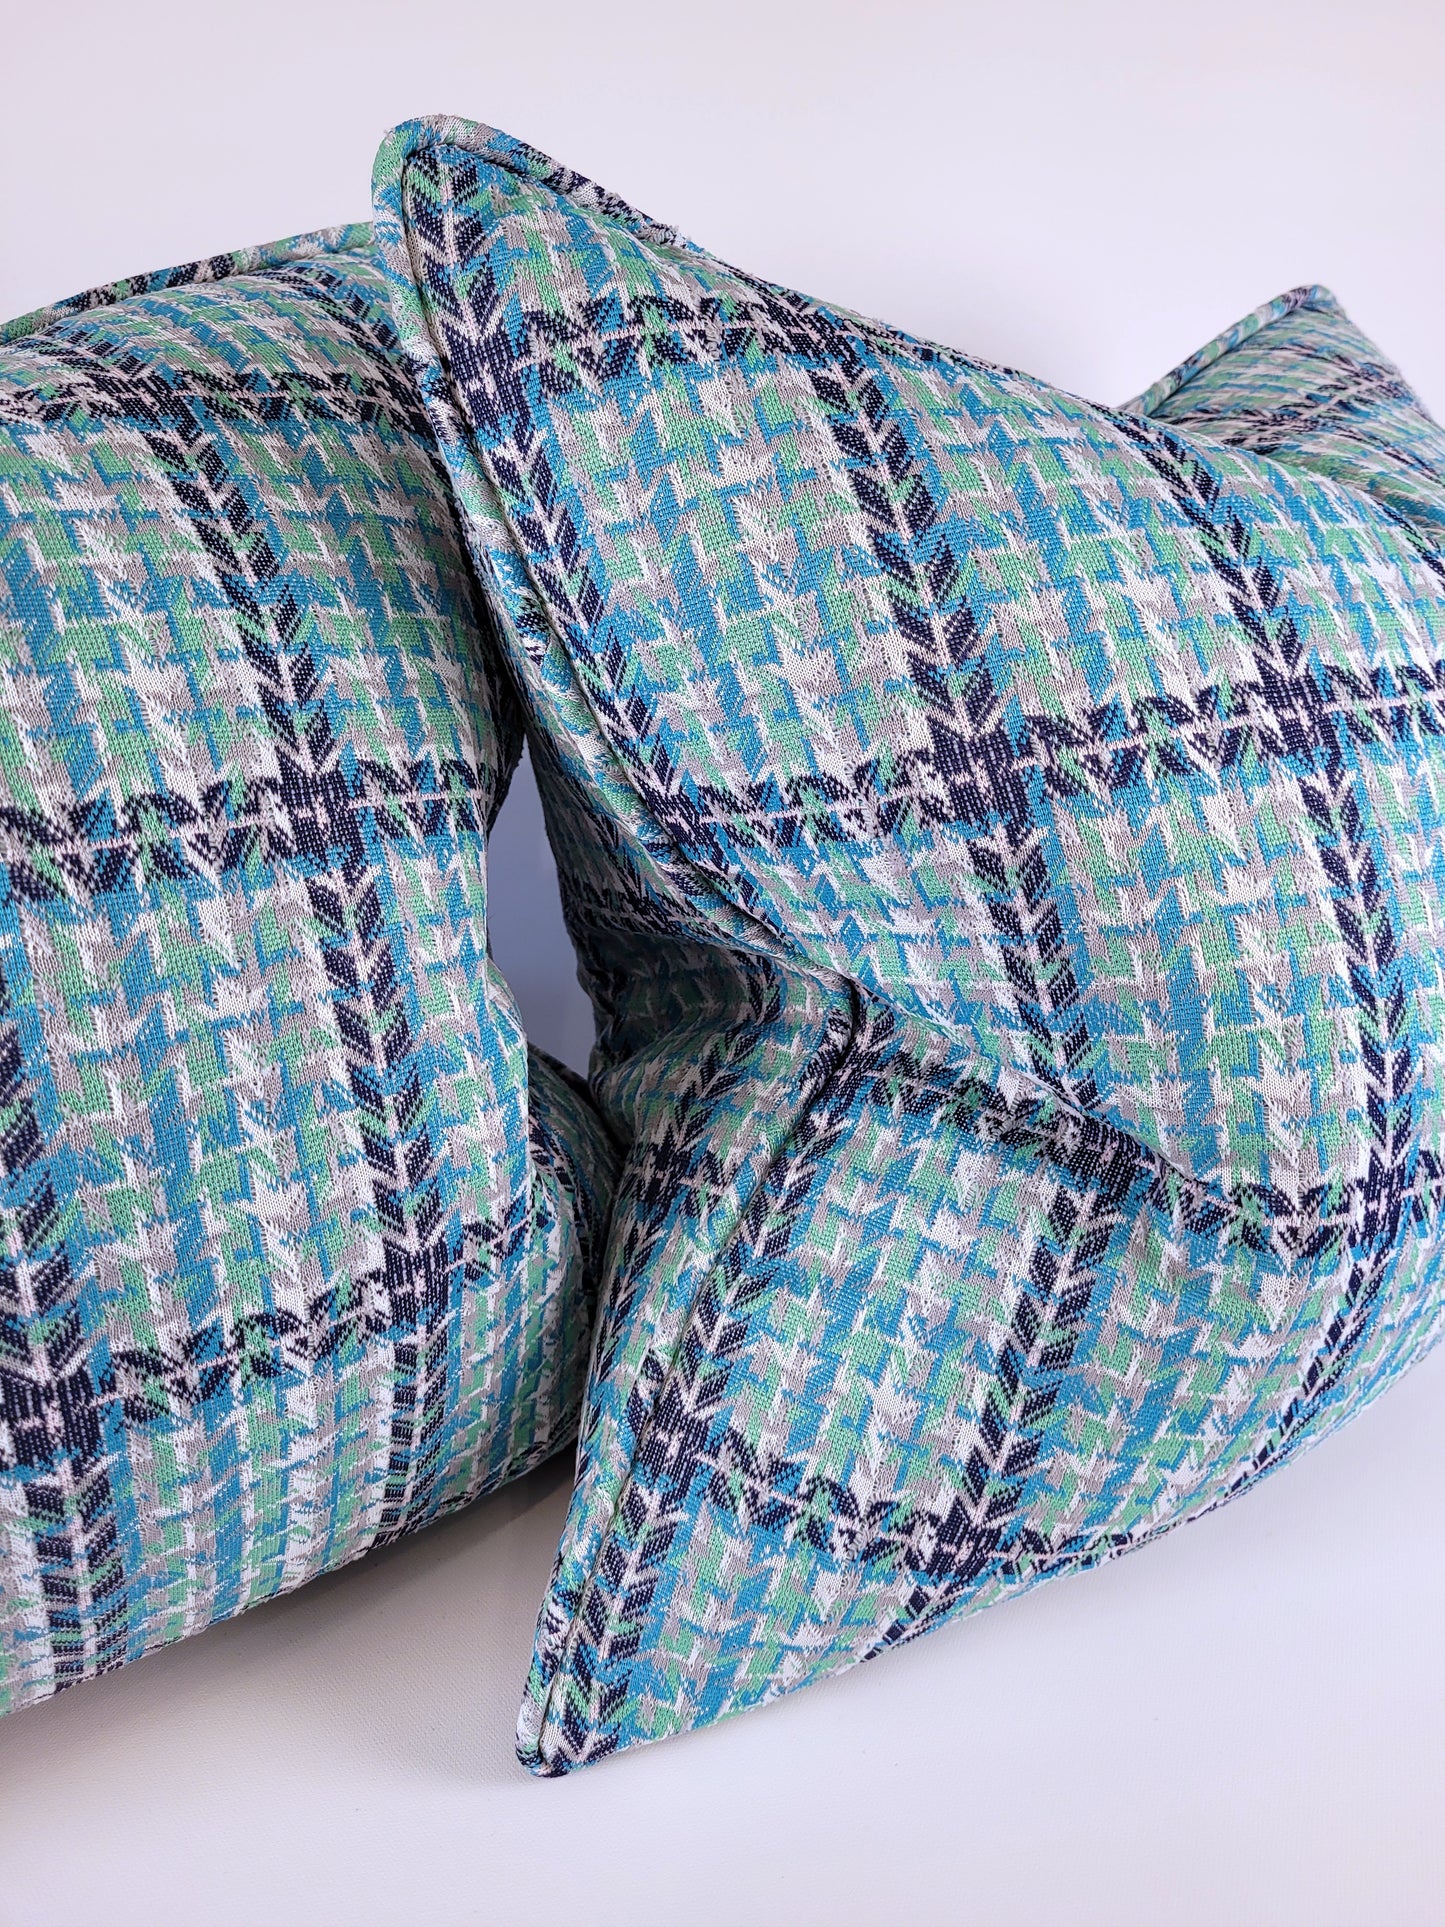 Vintage Early 1970s Navy Blue, Turquoise Blue, Grey, Green Double Knit Pillow 20"